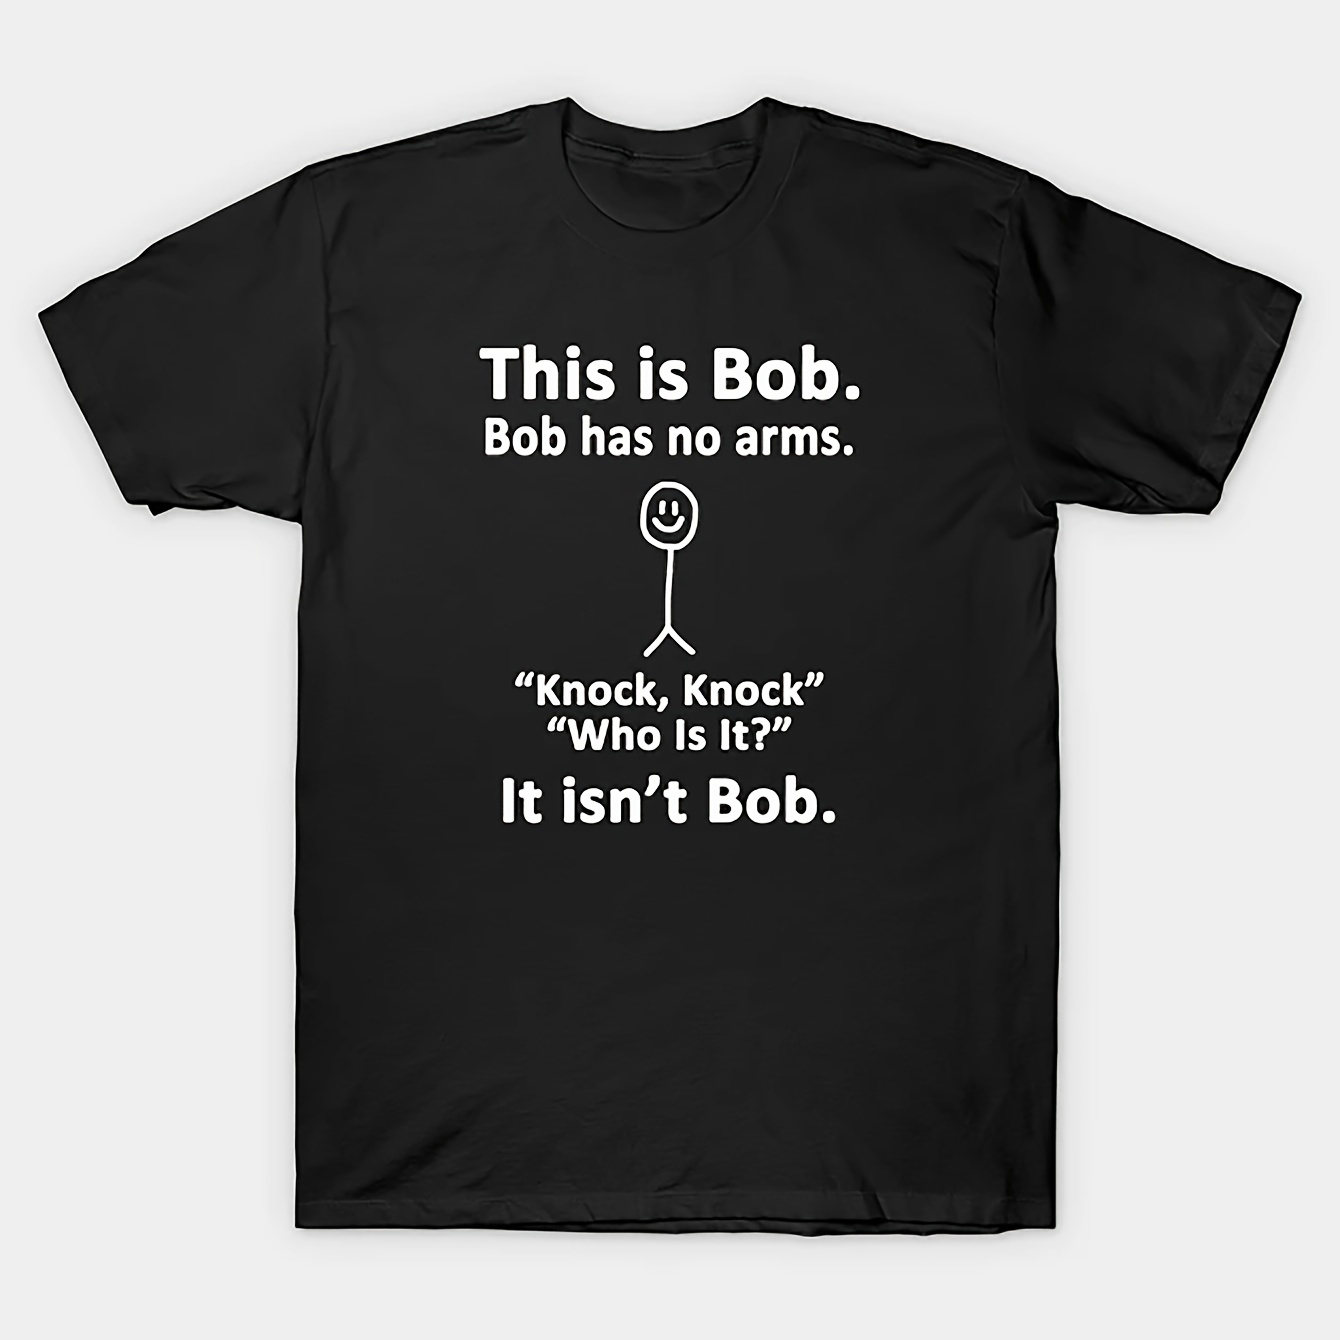 

Funny "this Is Bob" Black T-shirt, Casual Style, Graphic Tee With Knock Knock Joke, Short Sleeve, Unisex, Cotton Material, Comfortable Fit, Sizes S-xxl, Novelty Apparel